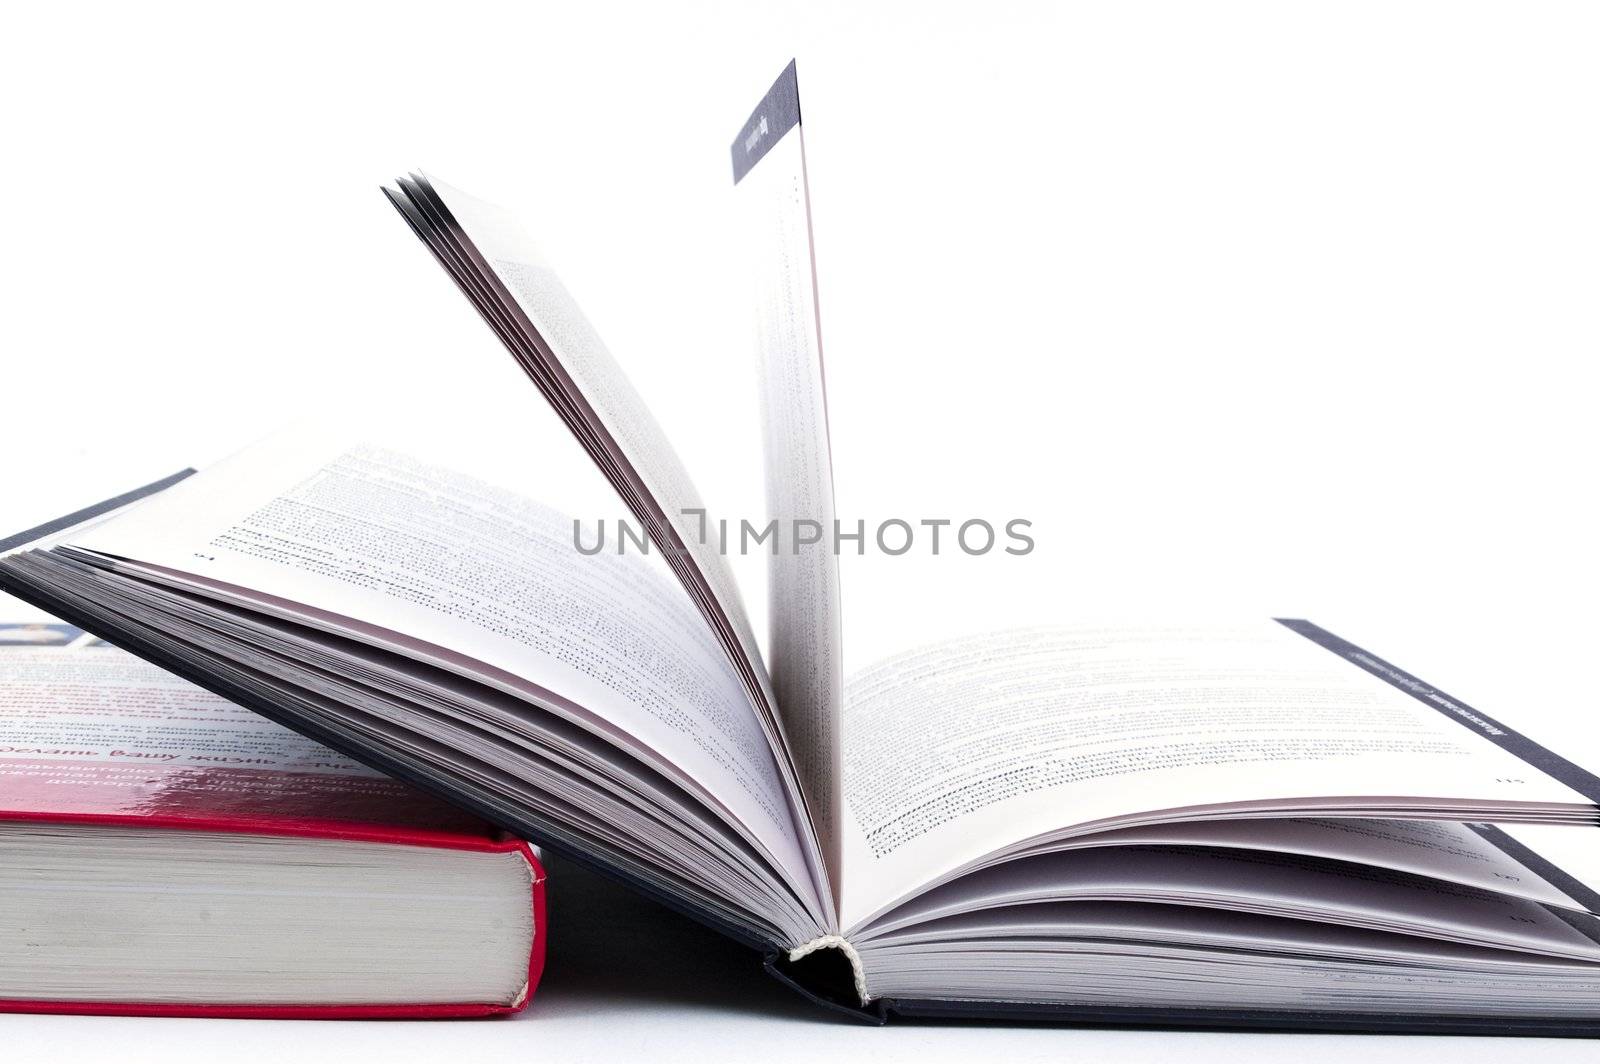 Turning pages of an empty white hardcover book